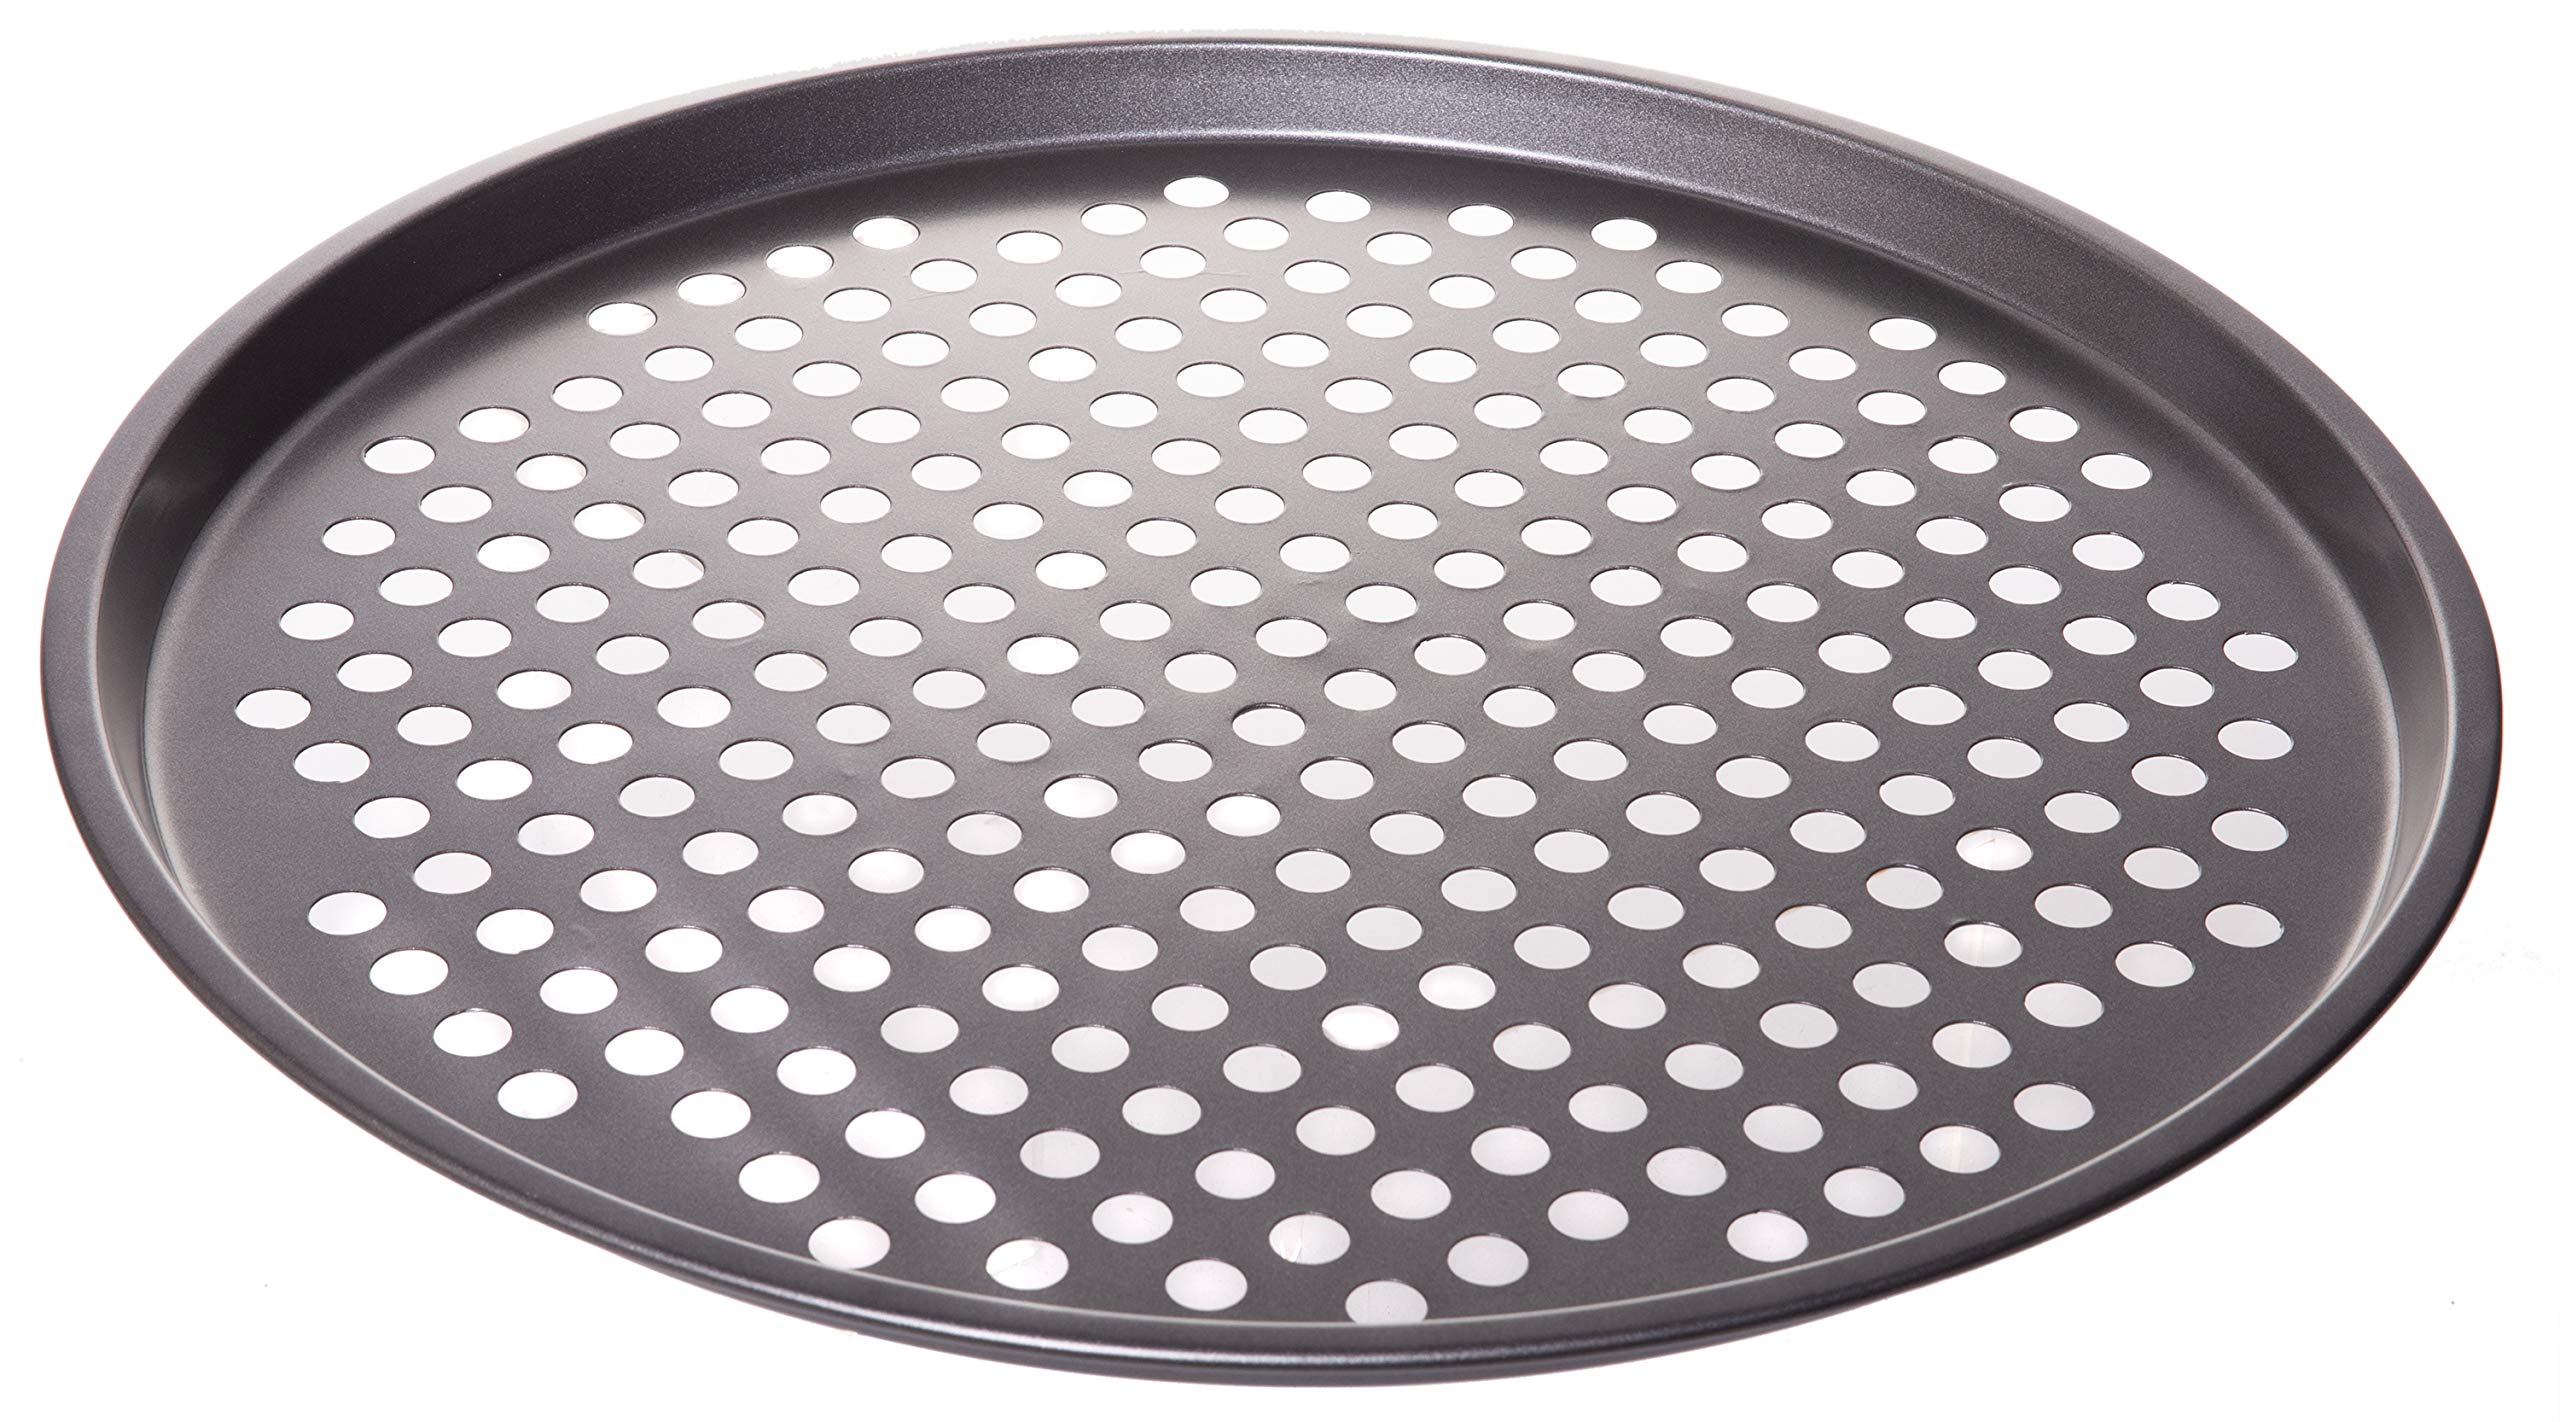 Red Co. 13 inch Round Non Stick Coated Carbon Steel Pizza Baking Pan Crisper with Holes